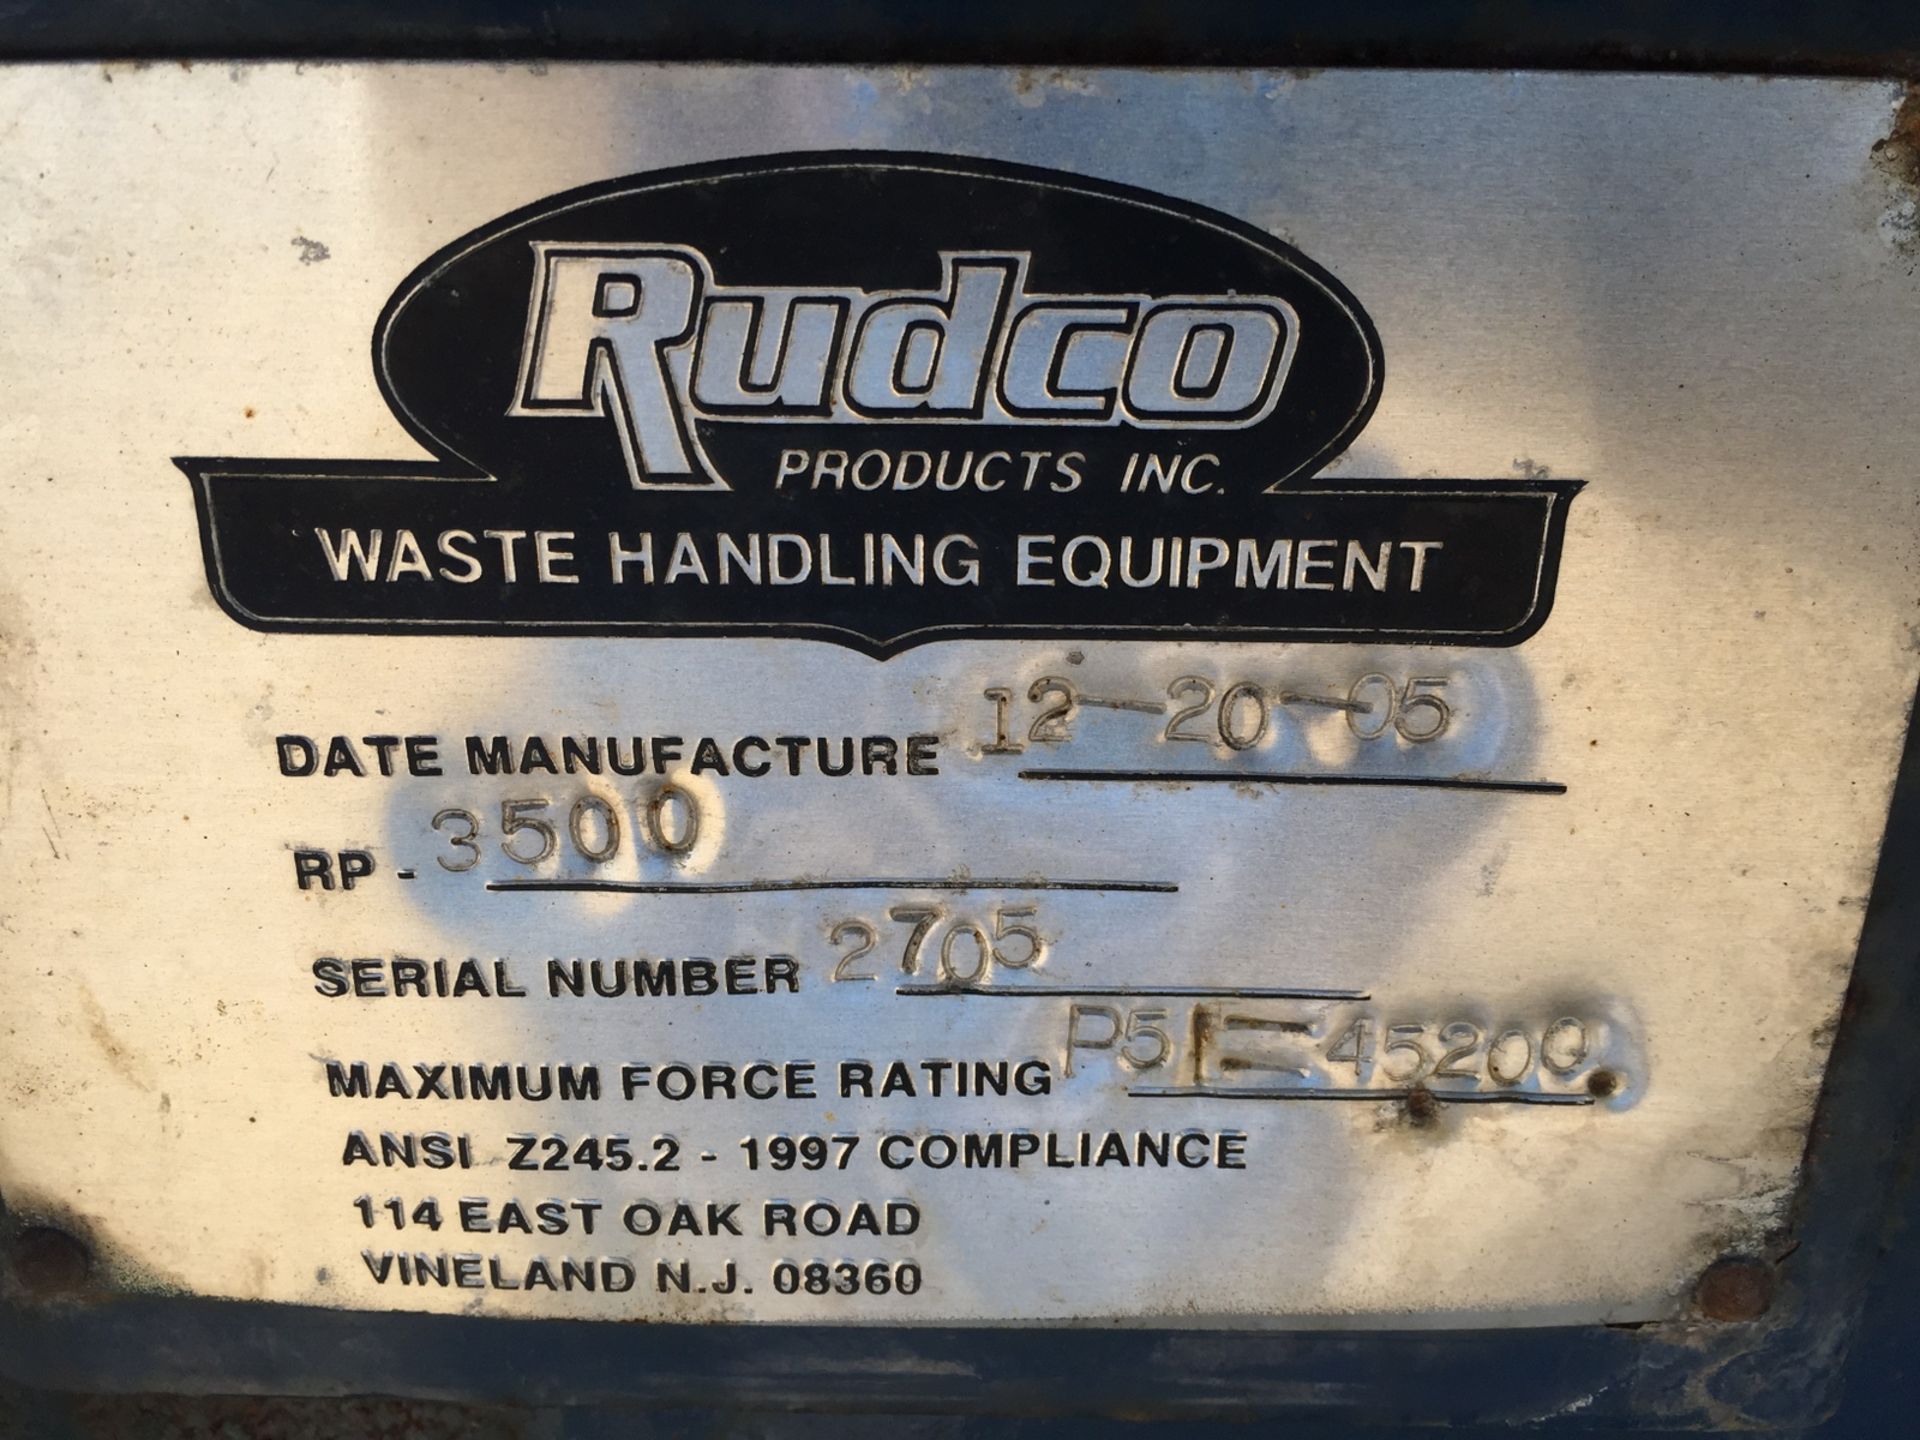 Rudco Mdl. RP-3500 Tough Pak Trash Compactor, Maximum Force 45,200 (This Lot is located at 201 - Image 5 of 5